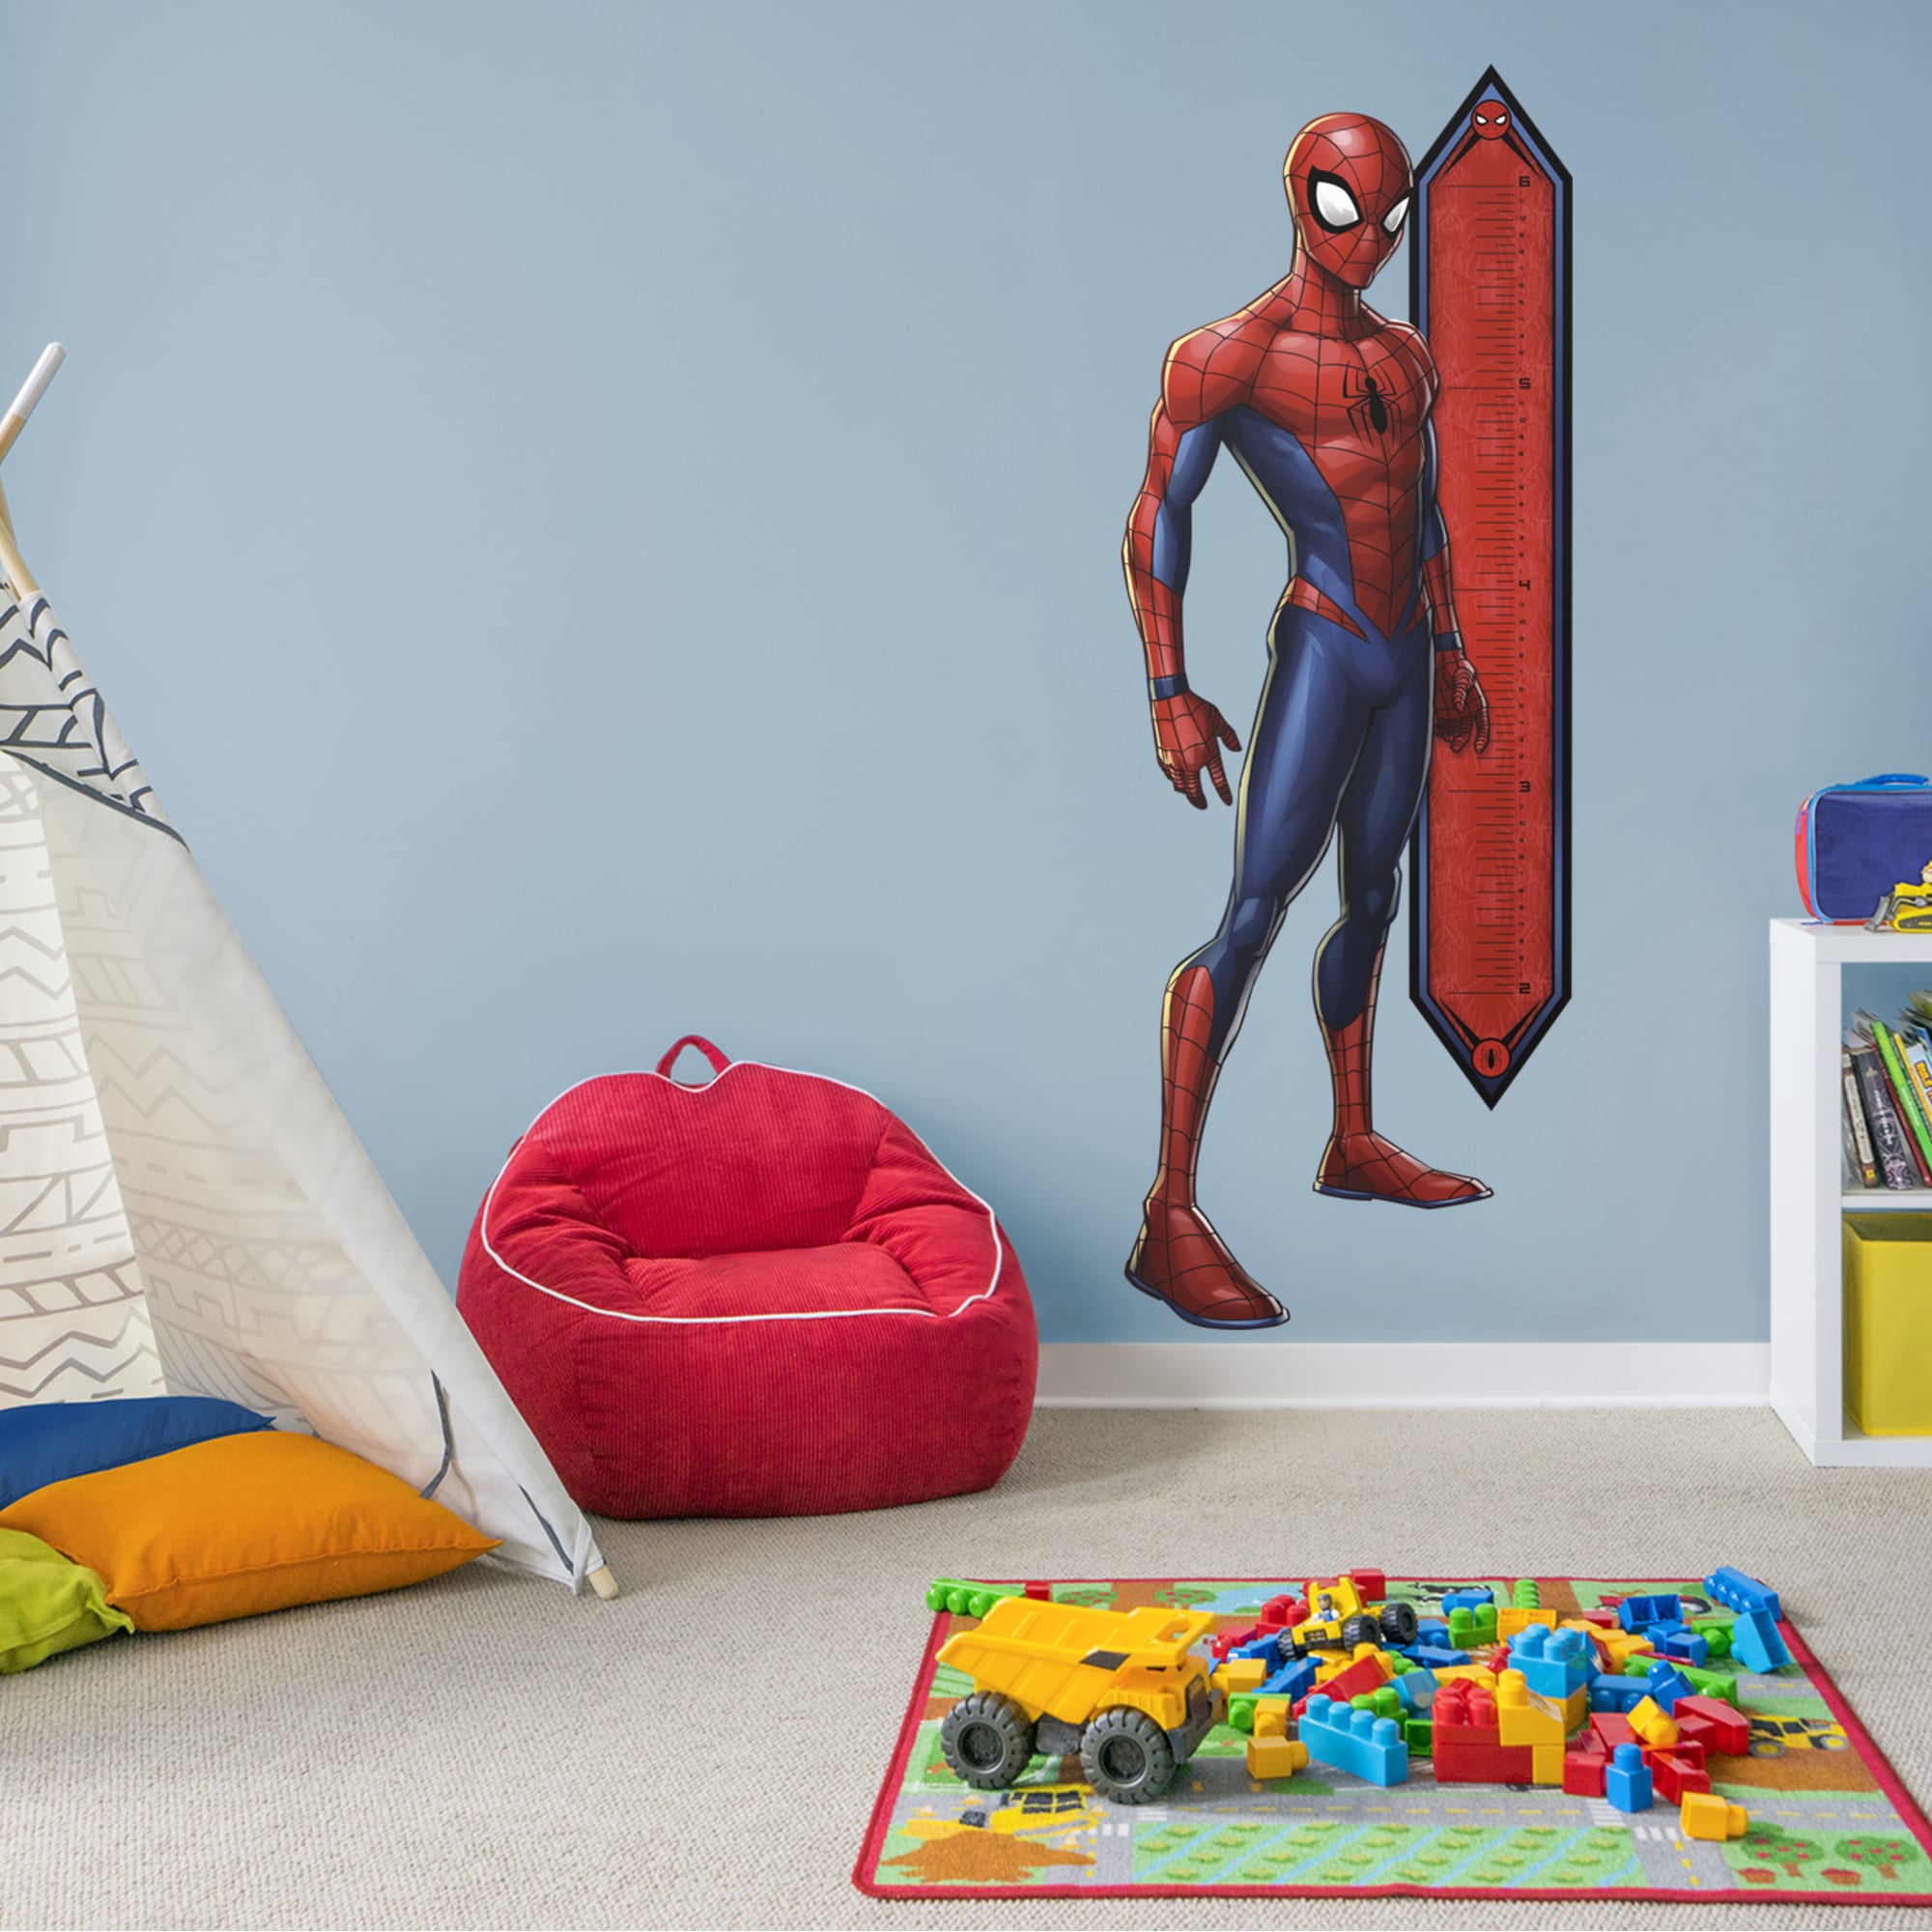 Spider-Man: Growth Chart - Officially Licensed Removable Wall Decal 27.0"W x 75.0"H by Fathead | Vinyl